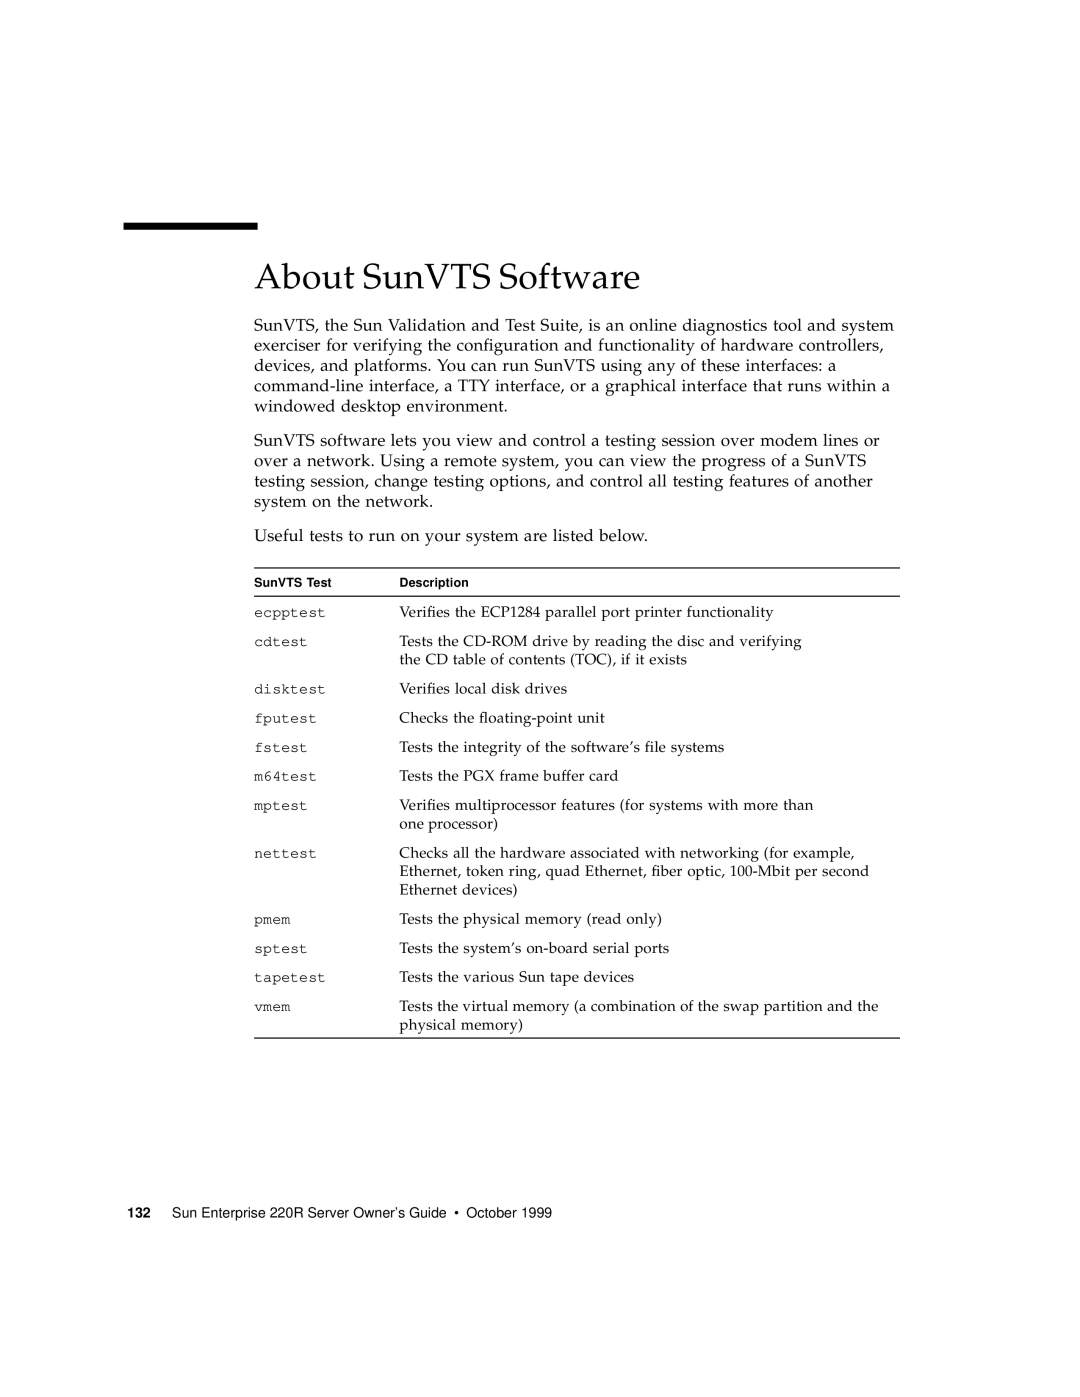 Sun Microsystems 220R manual About SunVTS Software 